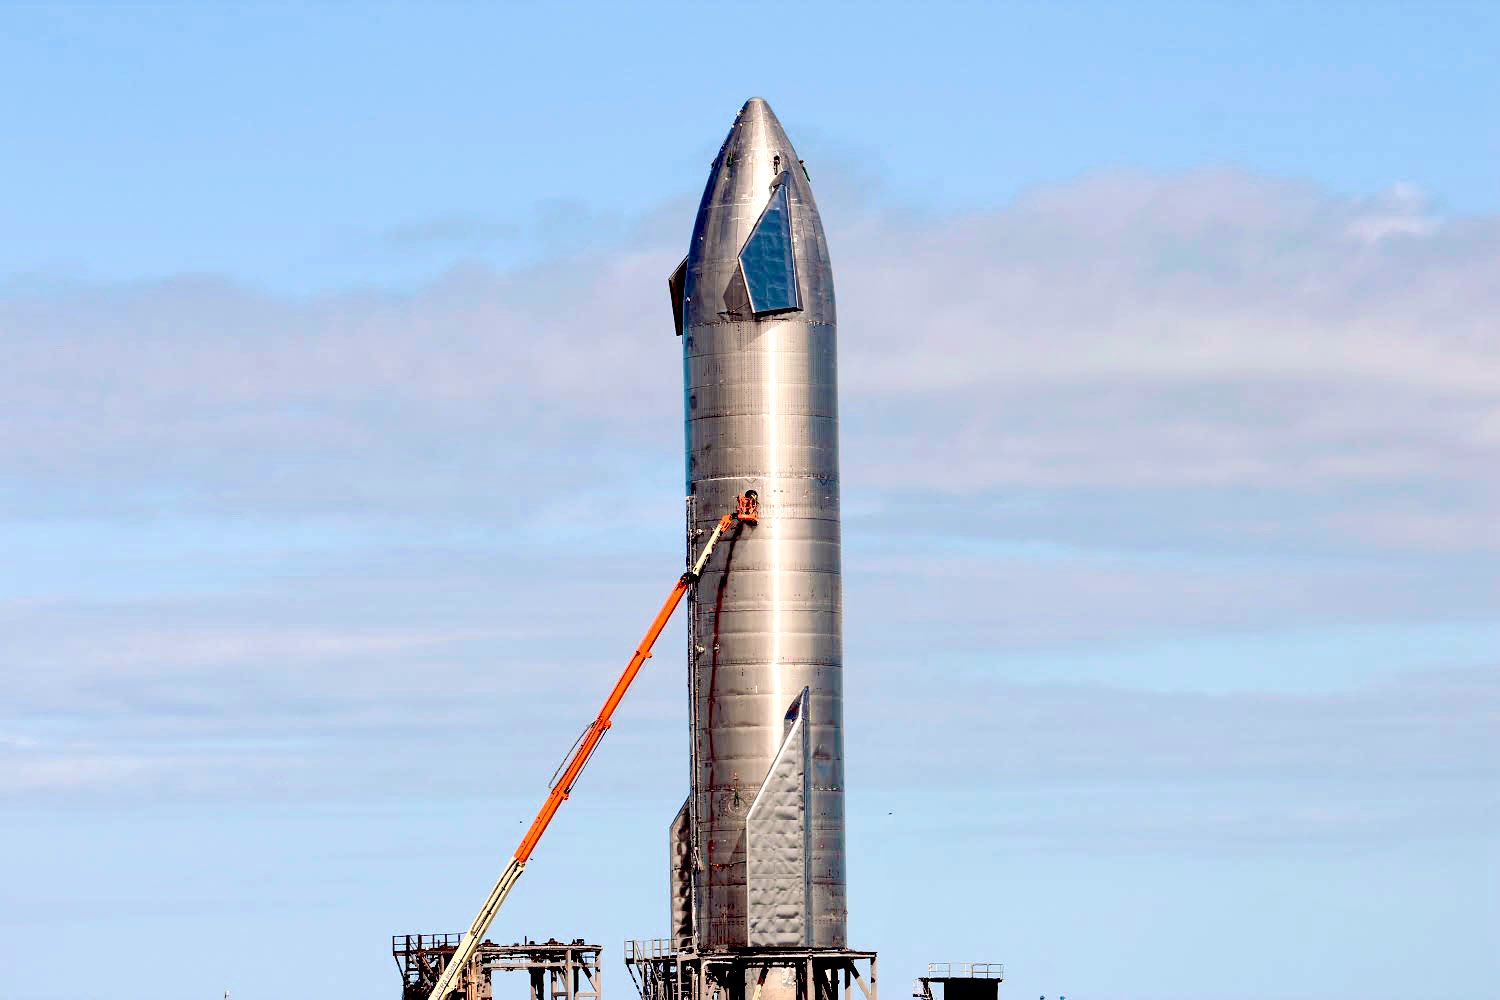 SpaceX plans to launch Starship SN9 soon, Preflight testing is underway